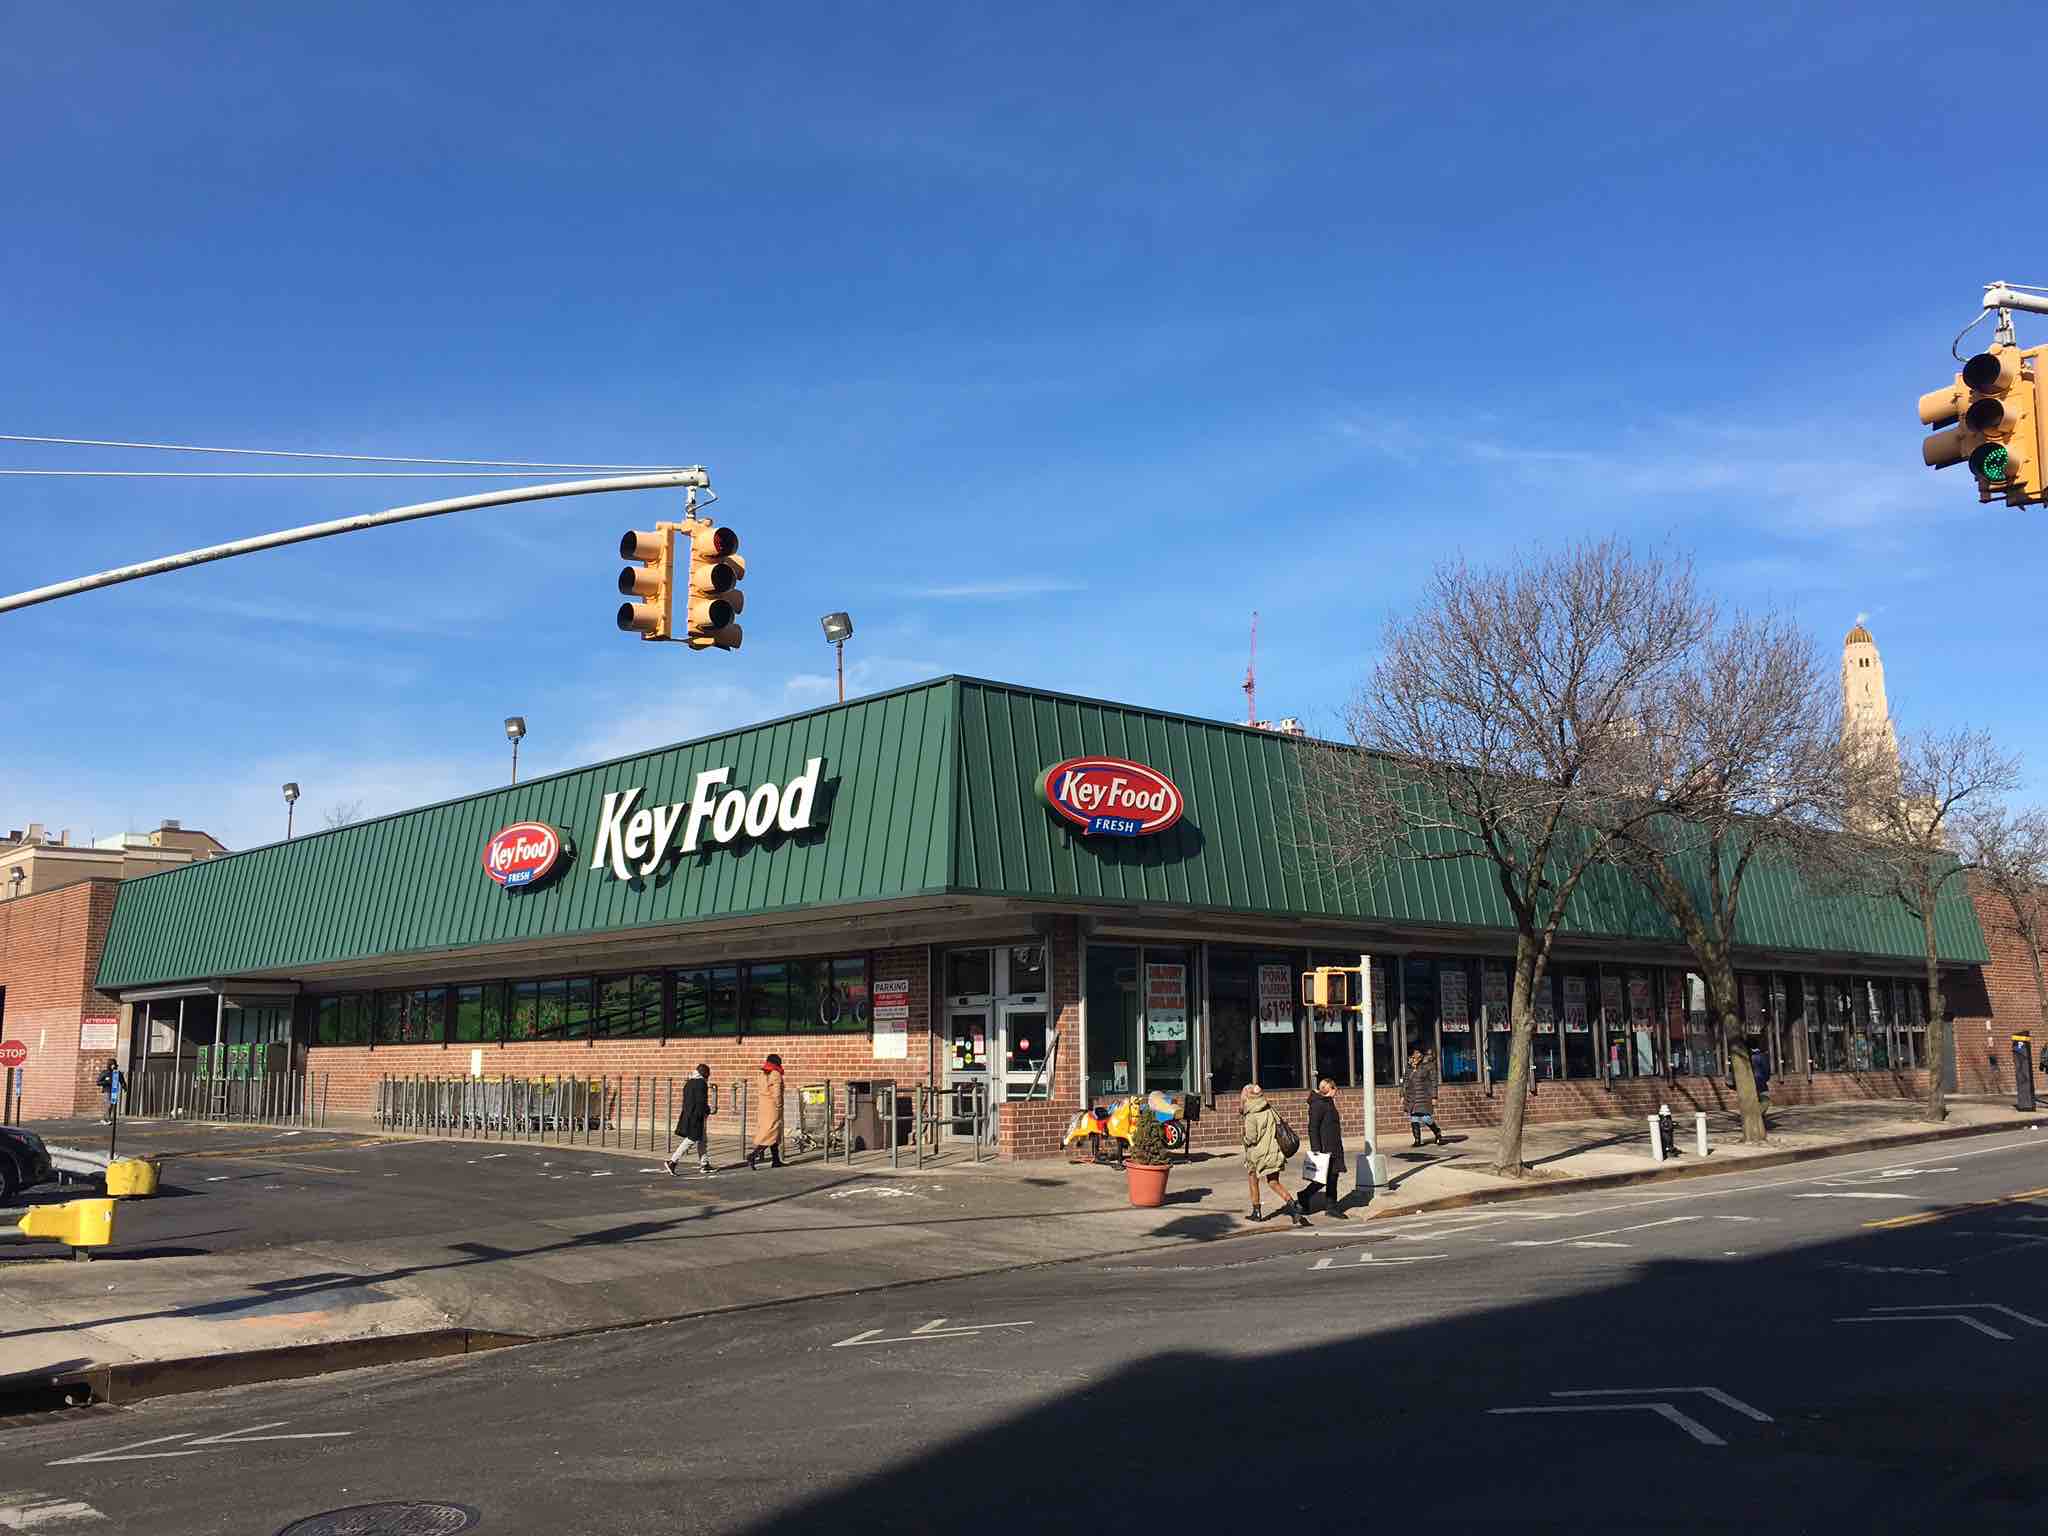 Community Meeting Scheduled For February 9 To Address Controversial Redevelopment Of 5th Avenue Key Food Parcel